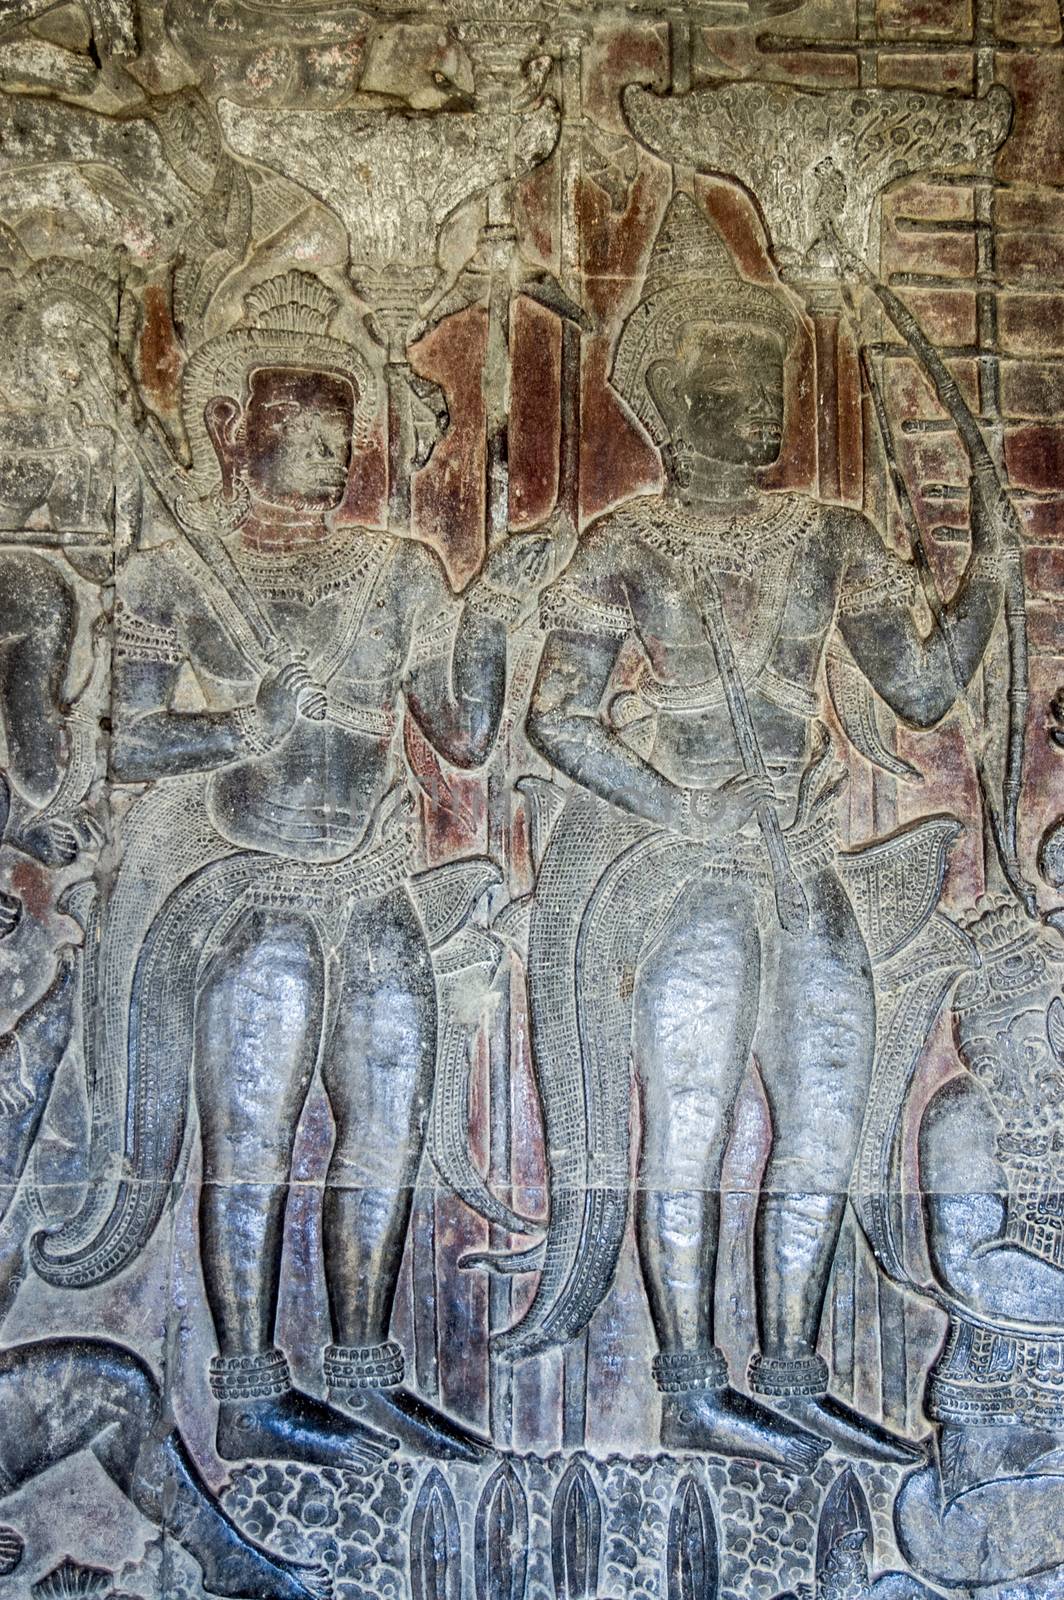 Ancient Khmer bas relief frieze of the Hindu gods Vishnu, carrying a mace and Rama with his bow and arrow. Wall of Angkor Wat temple, Siem Reap, Cambodia.